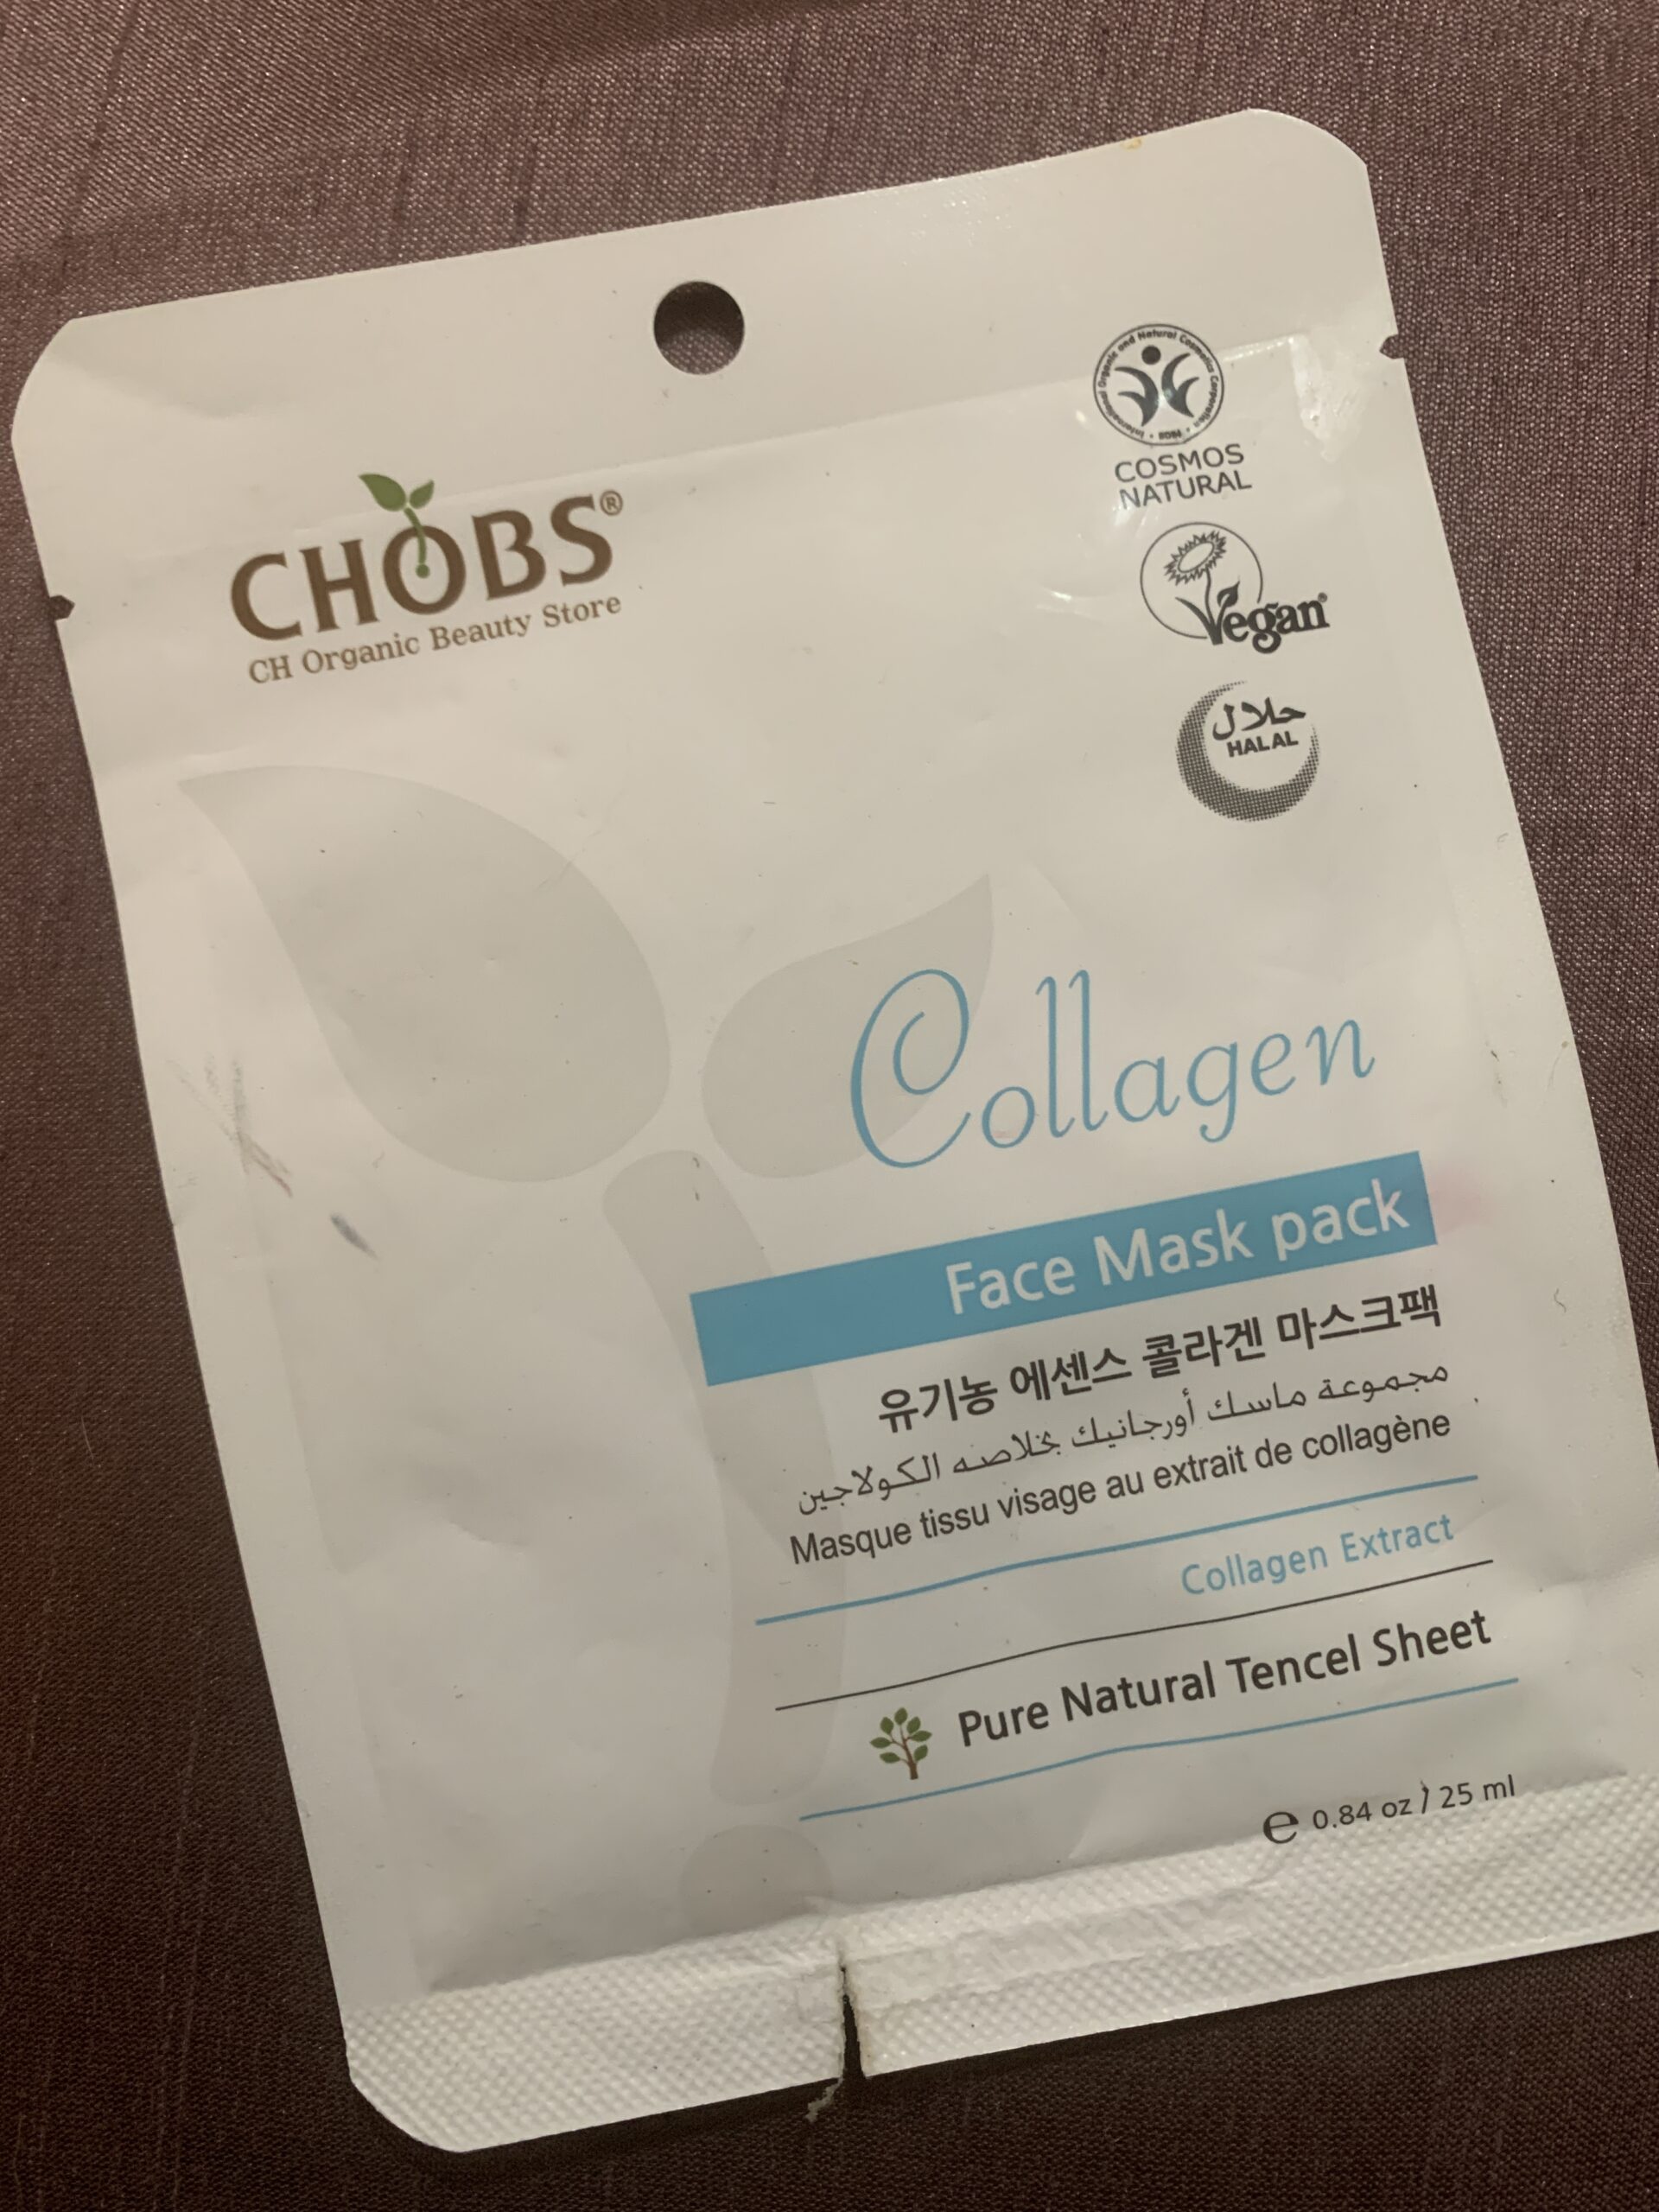 Chobs Collagen face mask pack